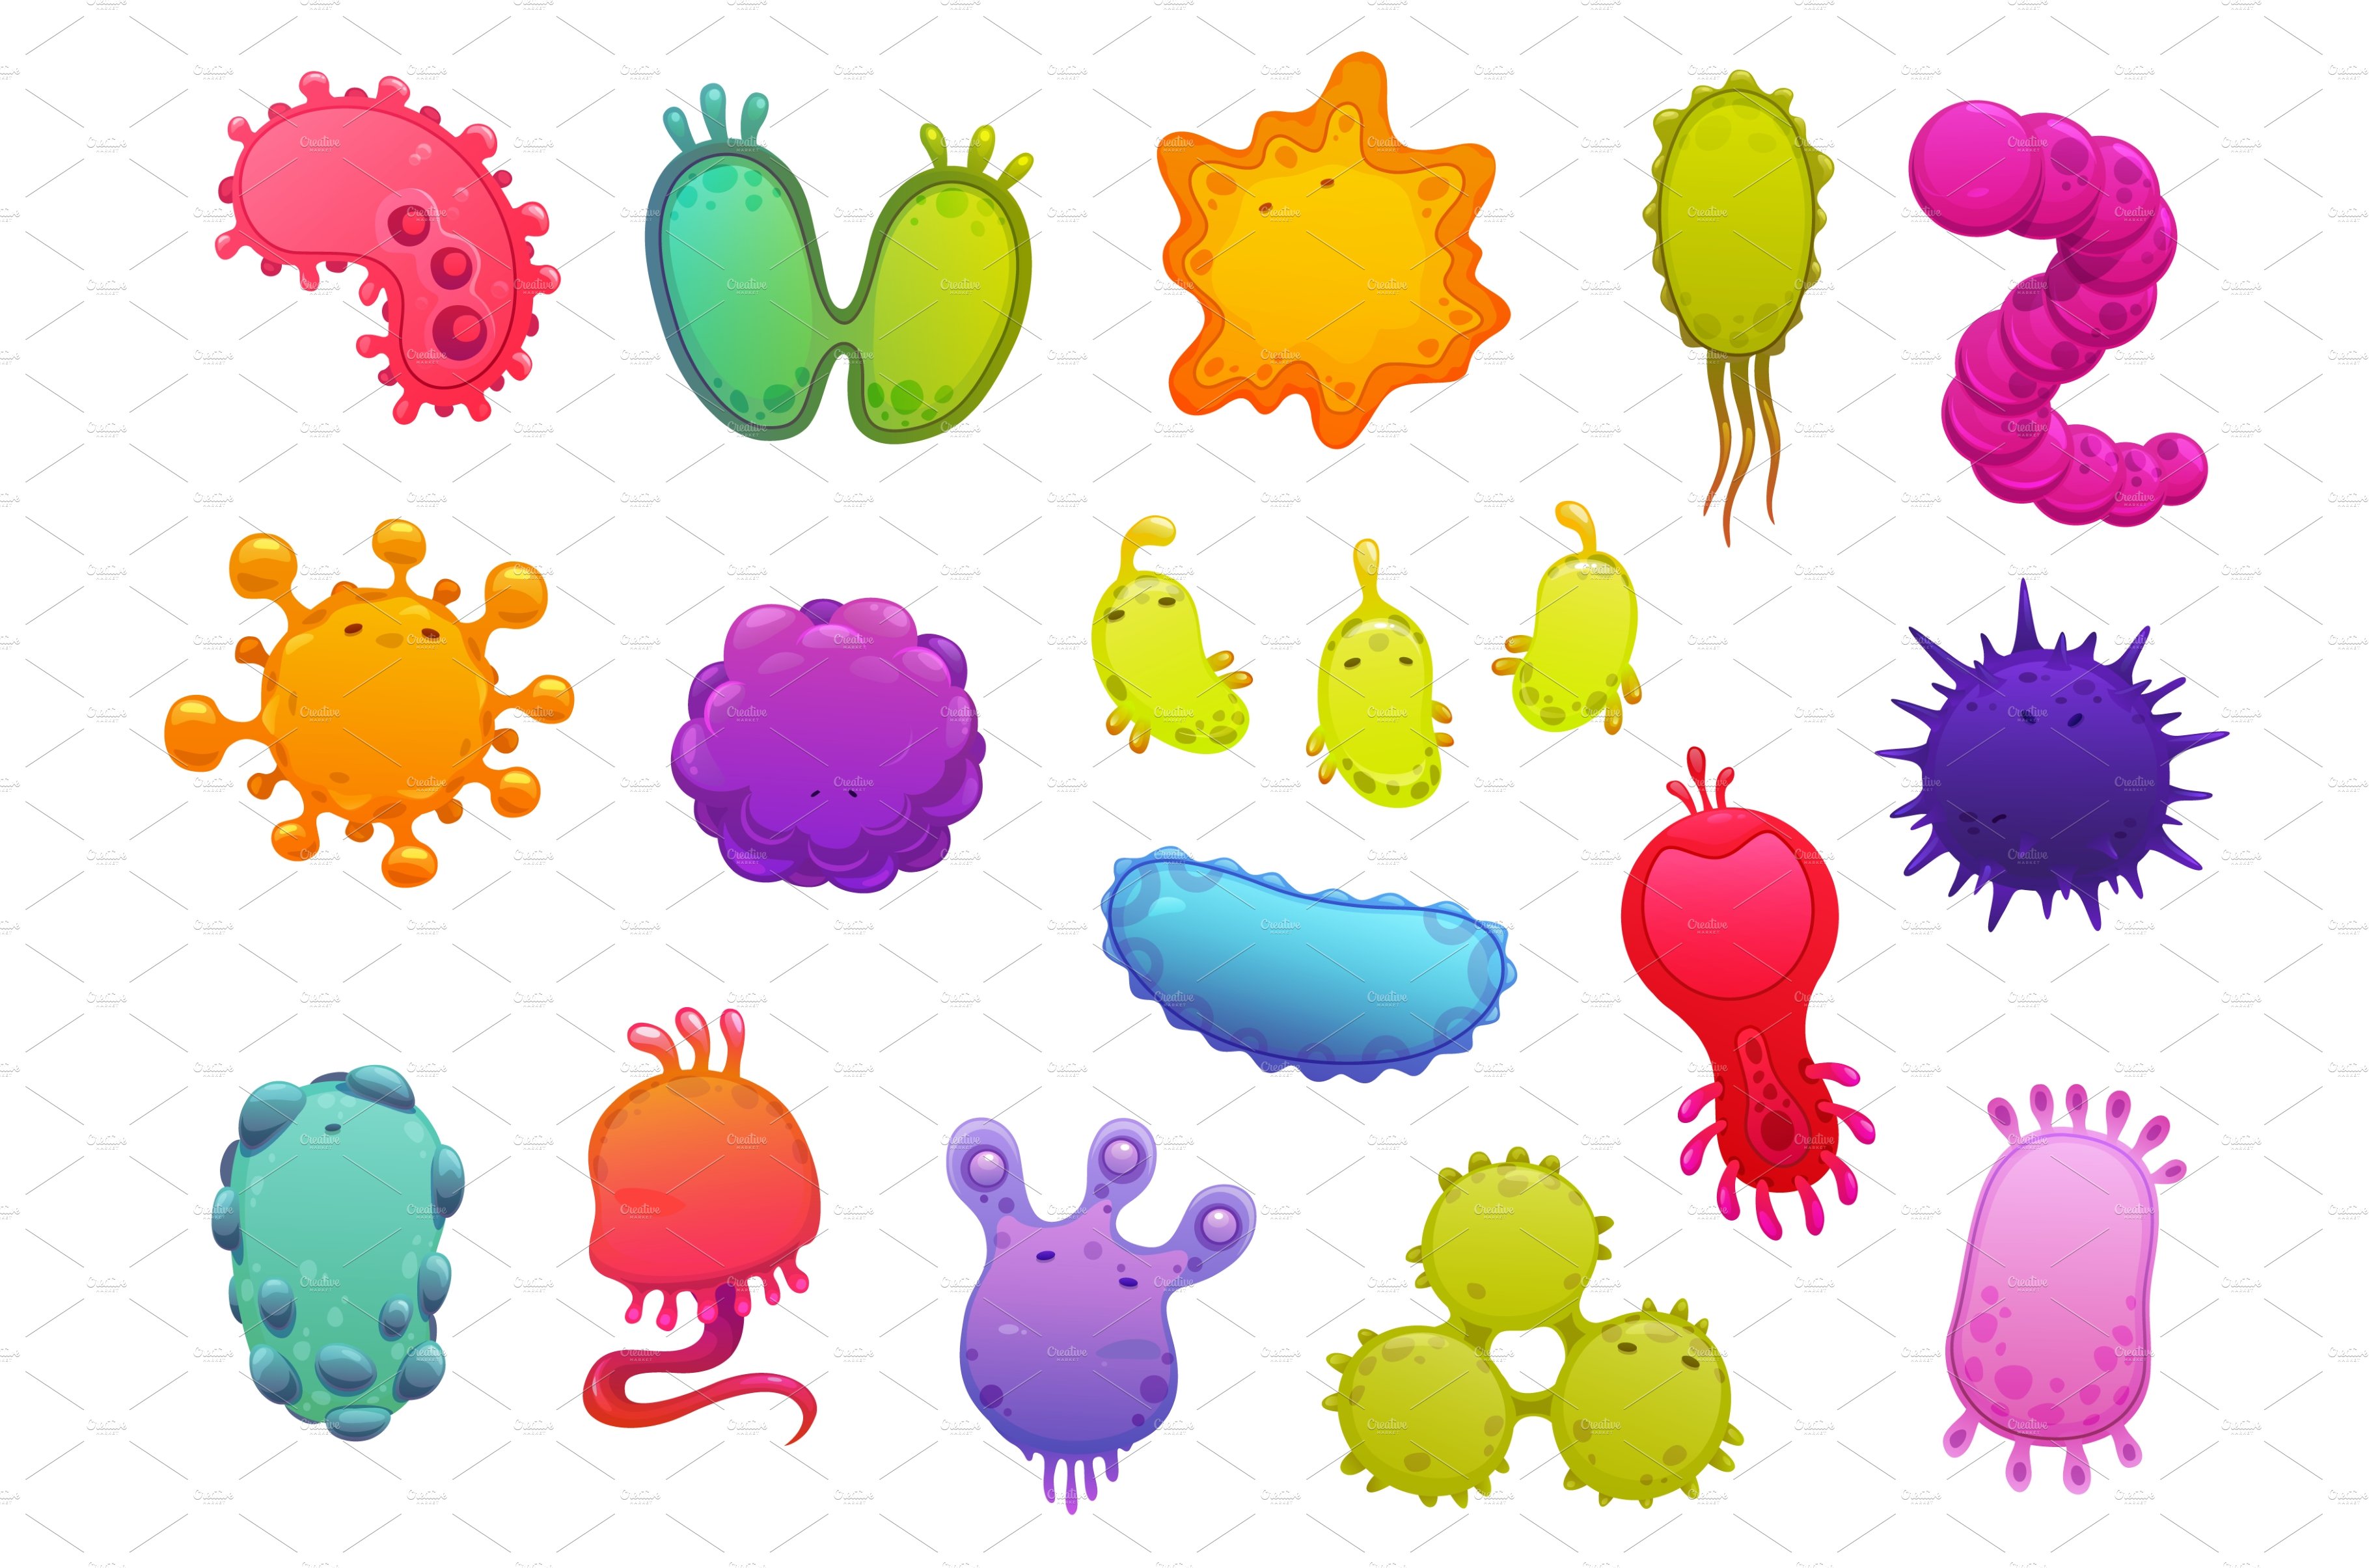 Microbes, viruses and pathogen cover image.